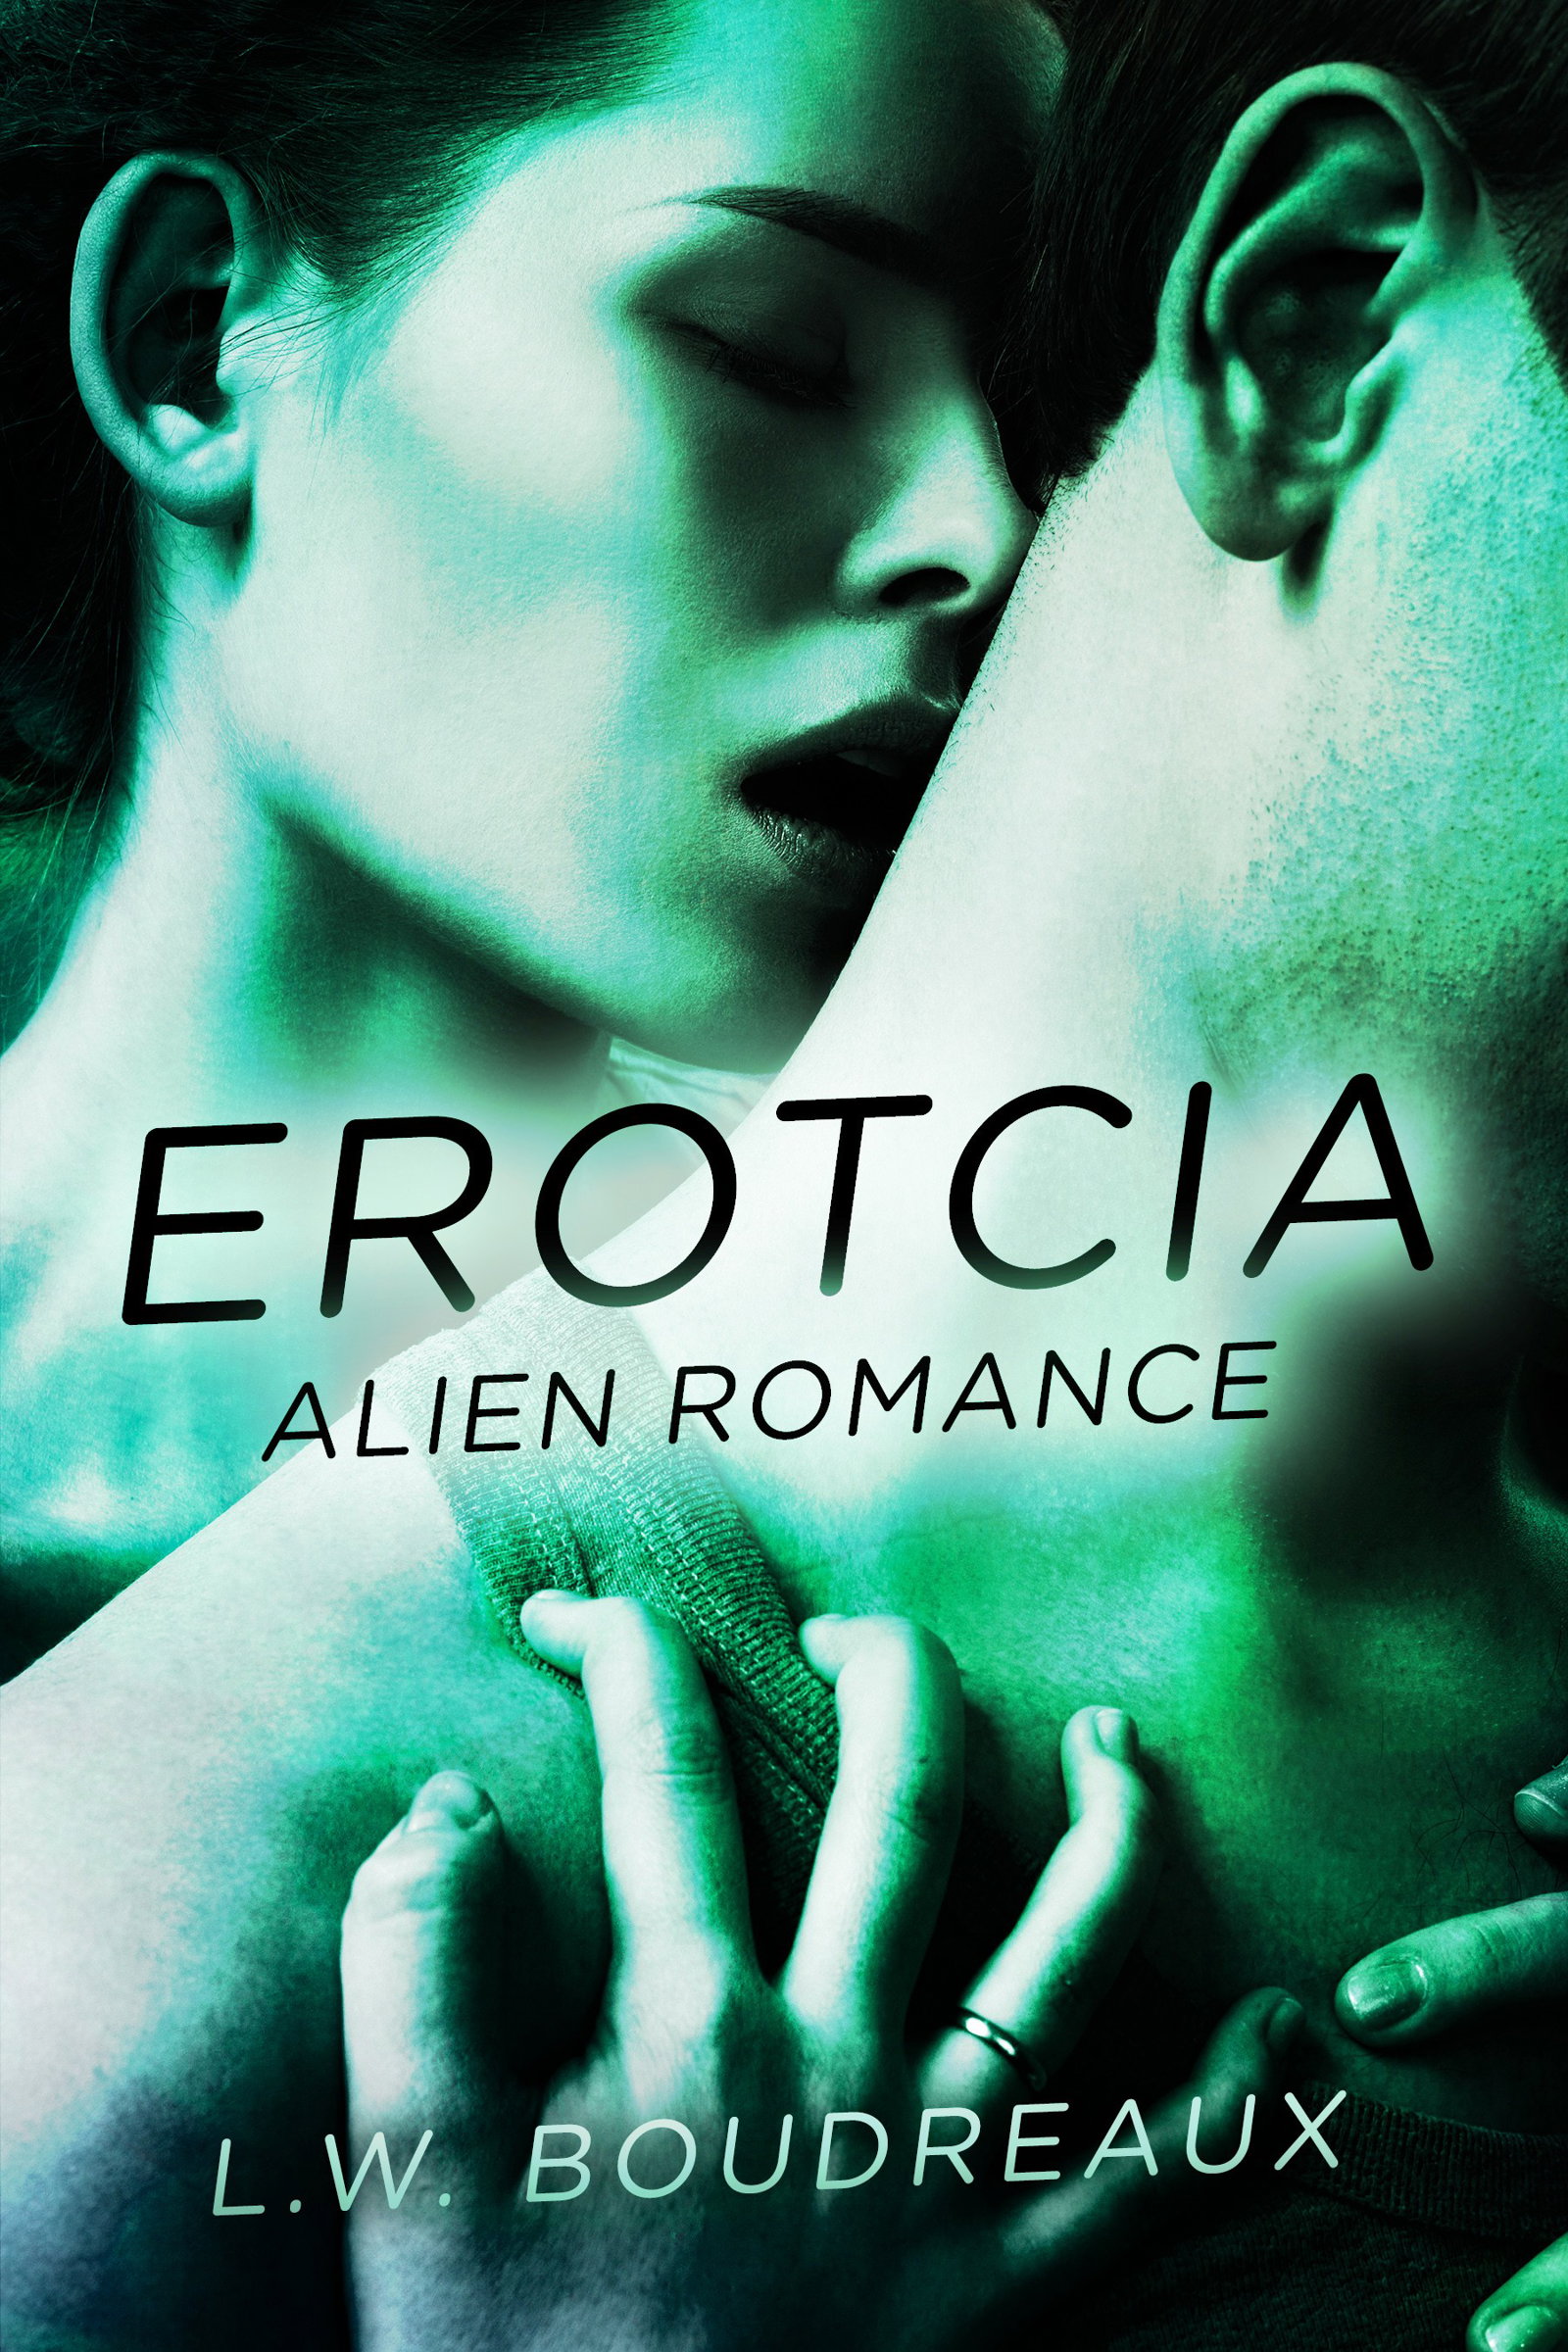 Photo by erotcia with the username @erotcia, who is a verified user,  May 1, 2020 at 12:14 PM. The post is about the topic Erotcia: Erotica books by LW Boudreaux and the text says 'COMMENT IF YOU'D GET IT ON WITH AN OTHERWORDLY TRAVELER!!

Available on Amazon for free. First book in the series. You can also read it for free at https://www.erotcia.com

#erotica #books #stories #shortstories #romance #alien #captive #captured #slave'